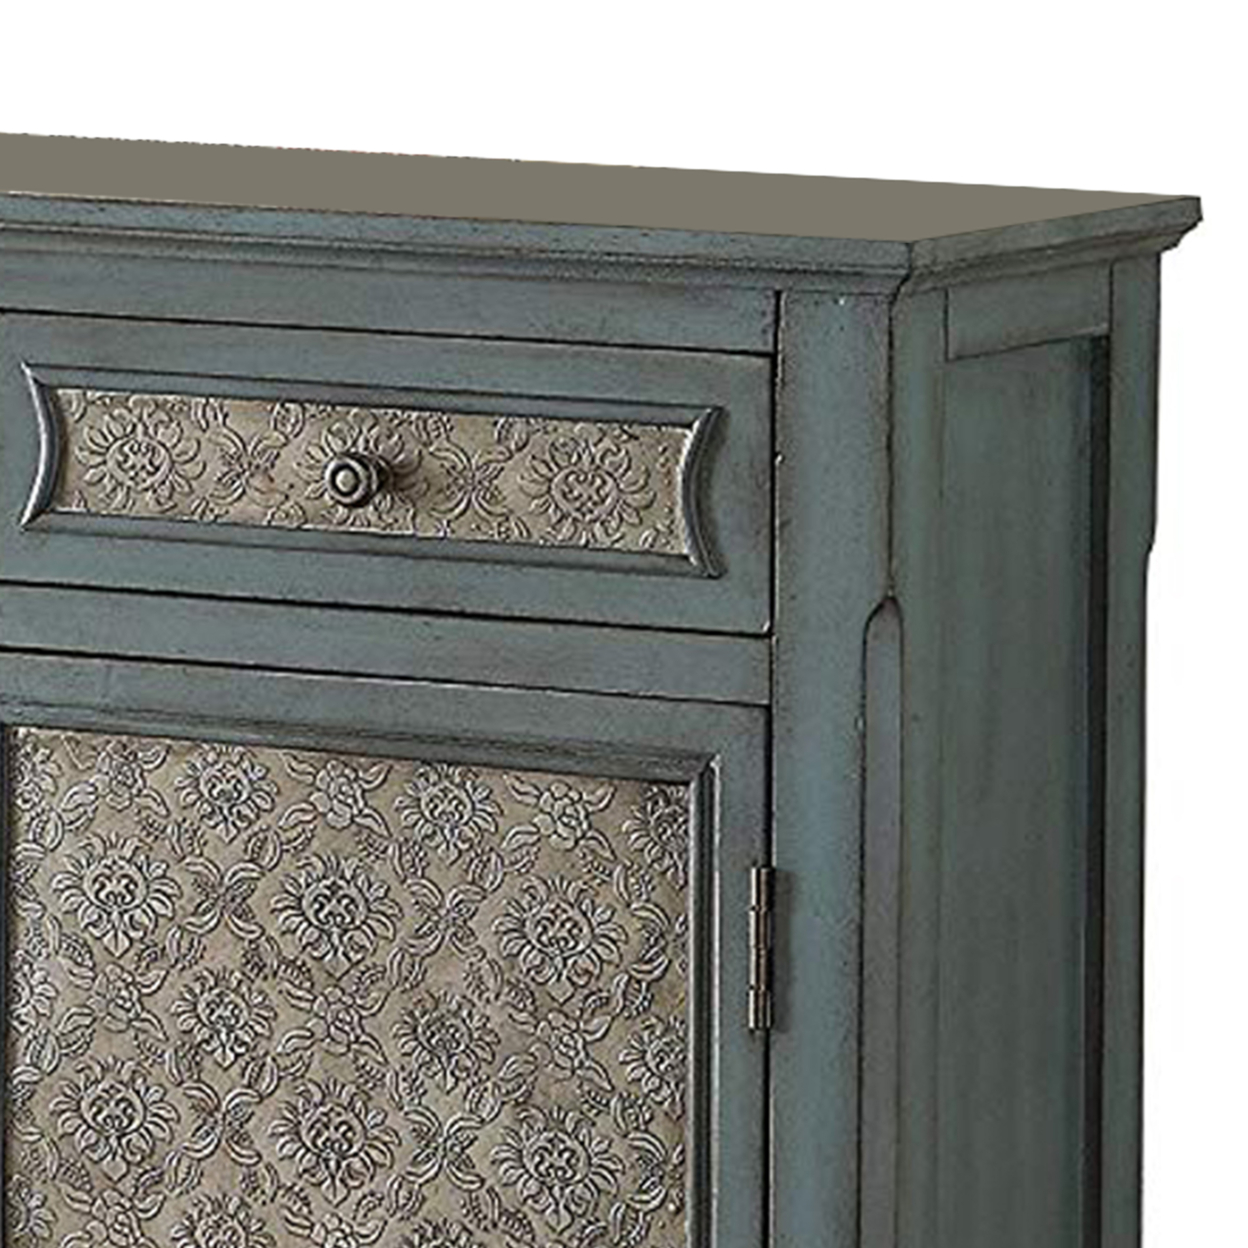 Storage Cabinet With 2 Doors And 2 Drawers, Antique Blue- Saltoro Sherpi